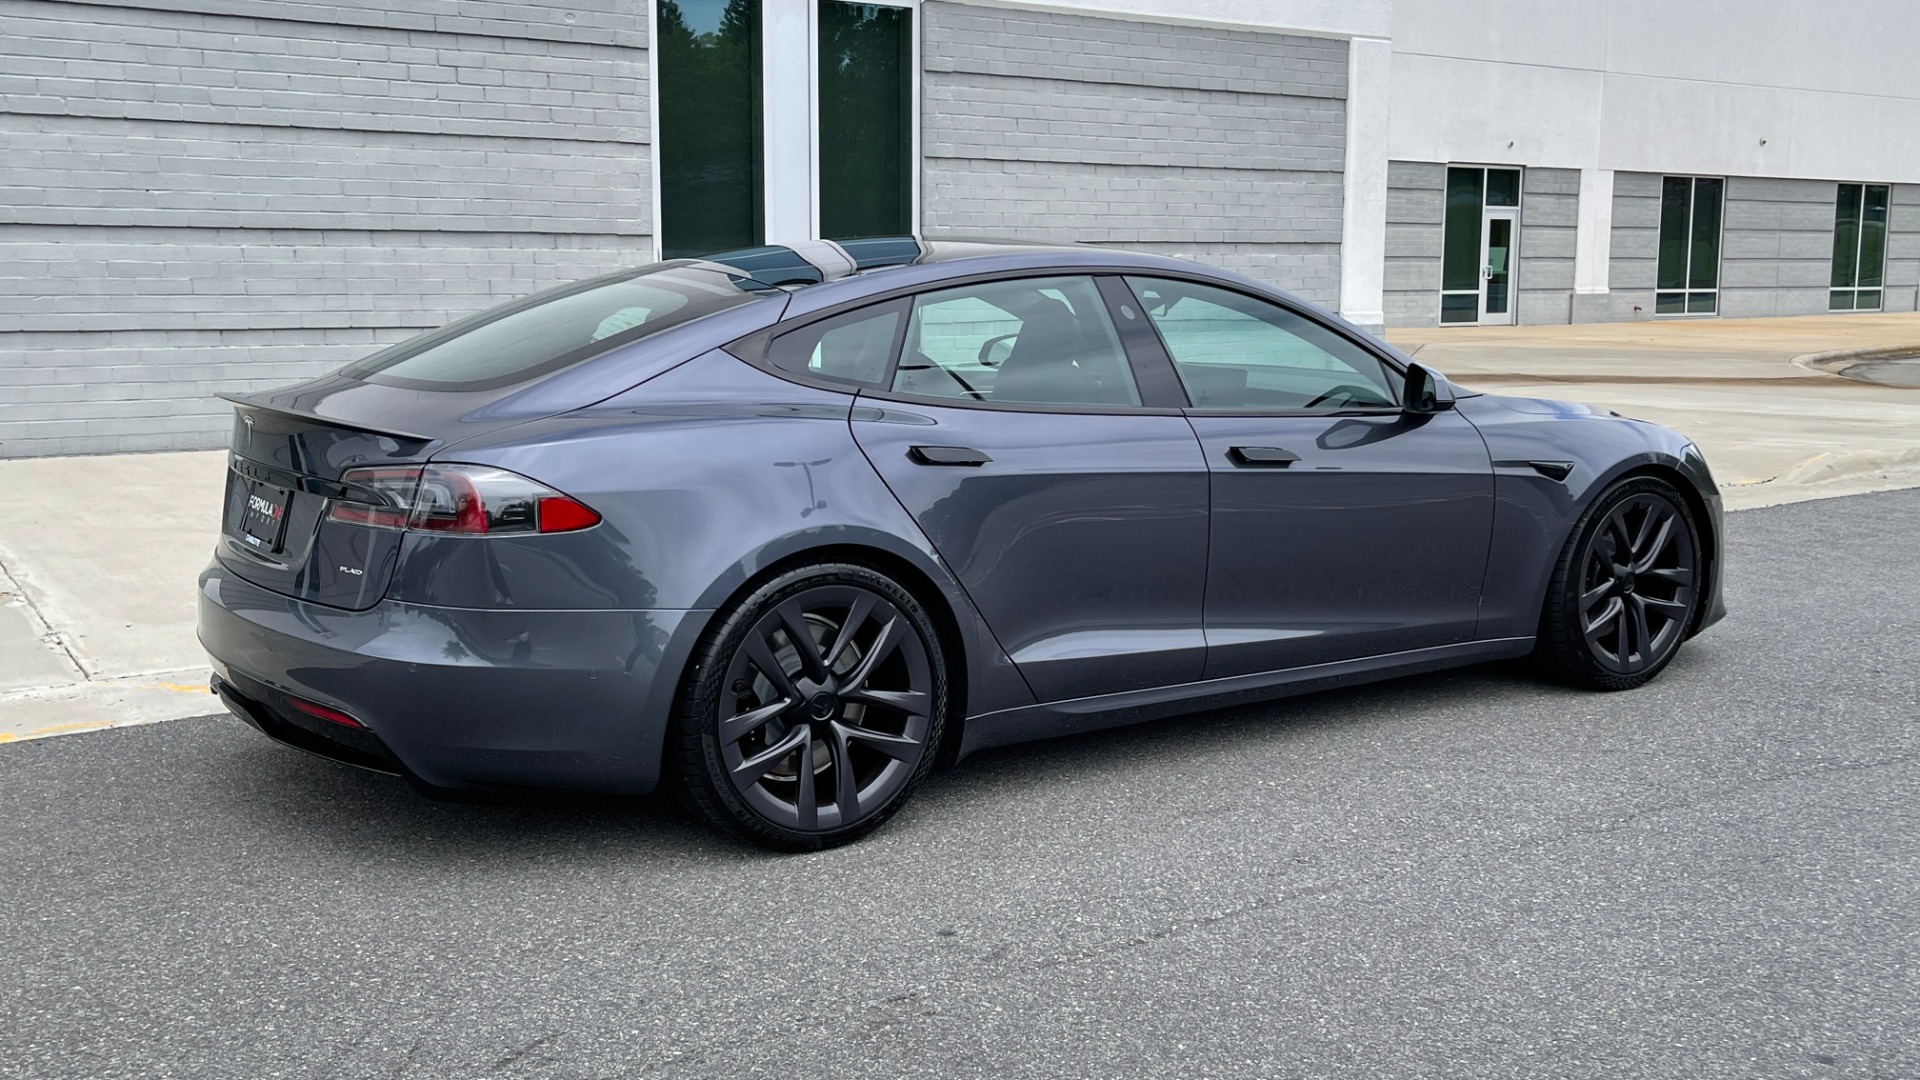 Used 2021 Tesla Model S Plaid / FULL SELF DRIVING / 21IN WHEELS / CARBON FIBER TRIM / PREMIUM CONNE for sale $105,000 at Formula Imports in Charlotte NC 28227 6